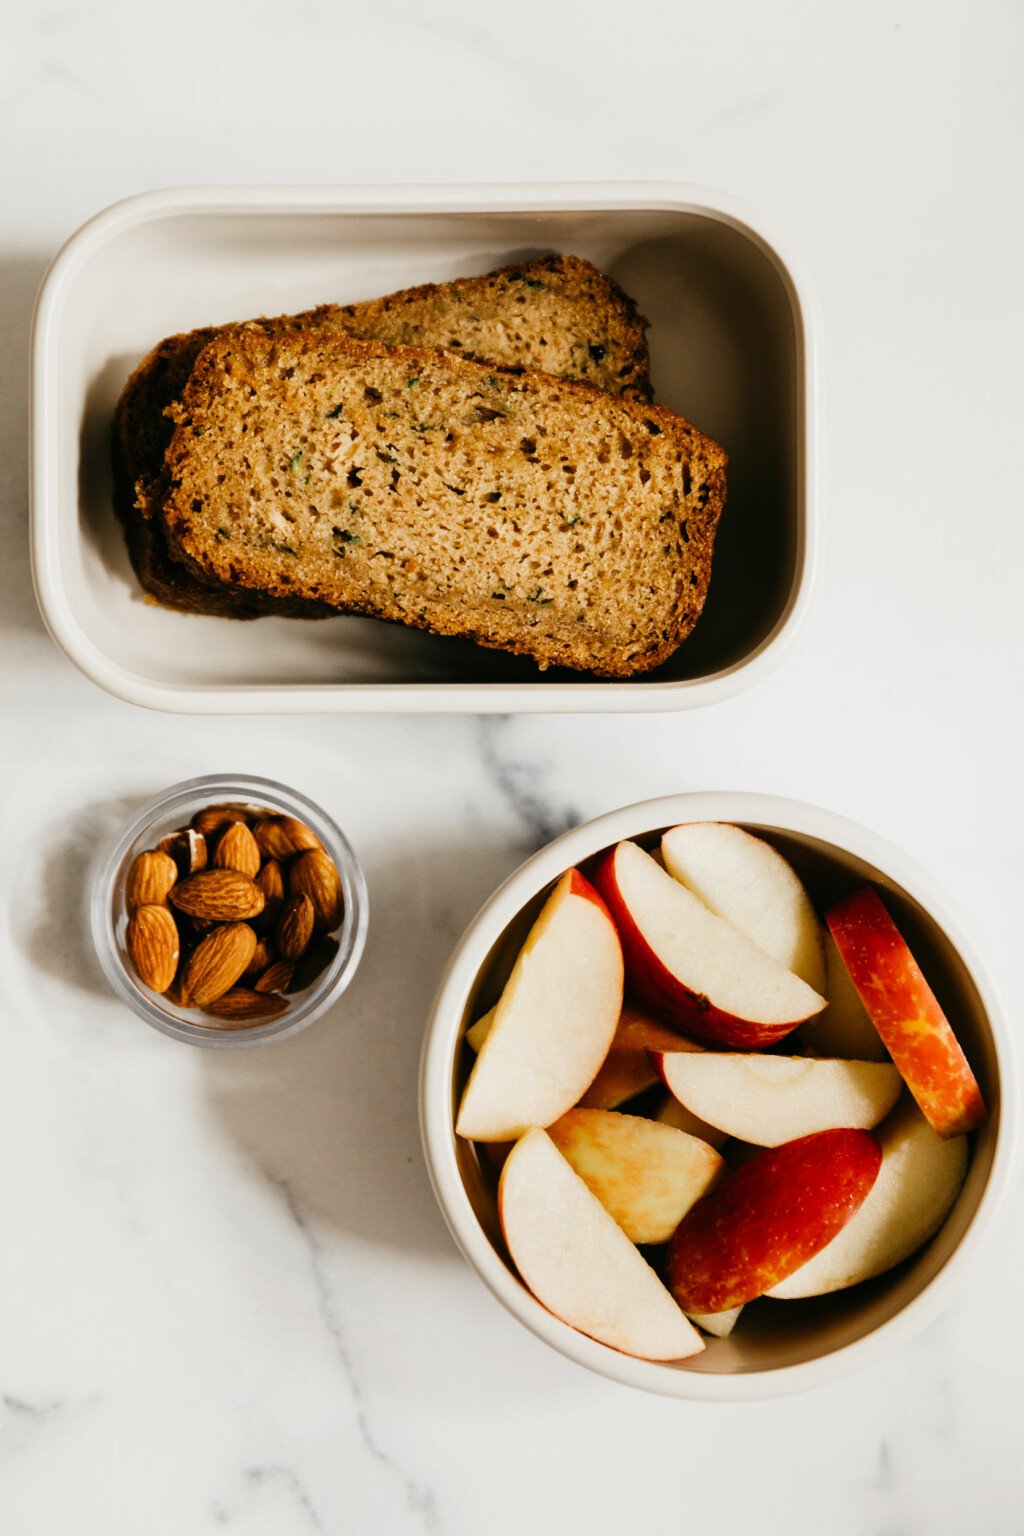 Two slices of zucchini bread, some apple slices, and raw almonds are packed in containers and resting on a white surface.